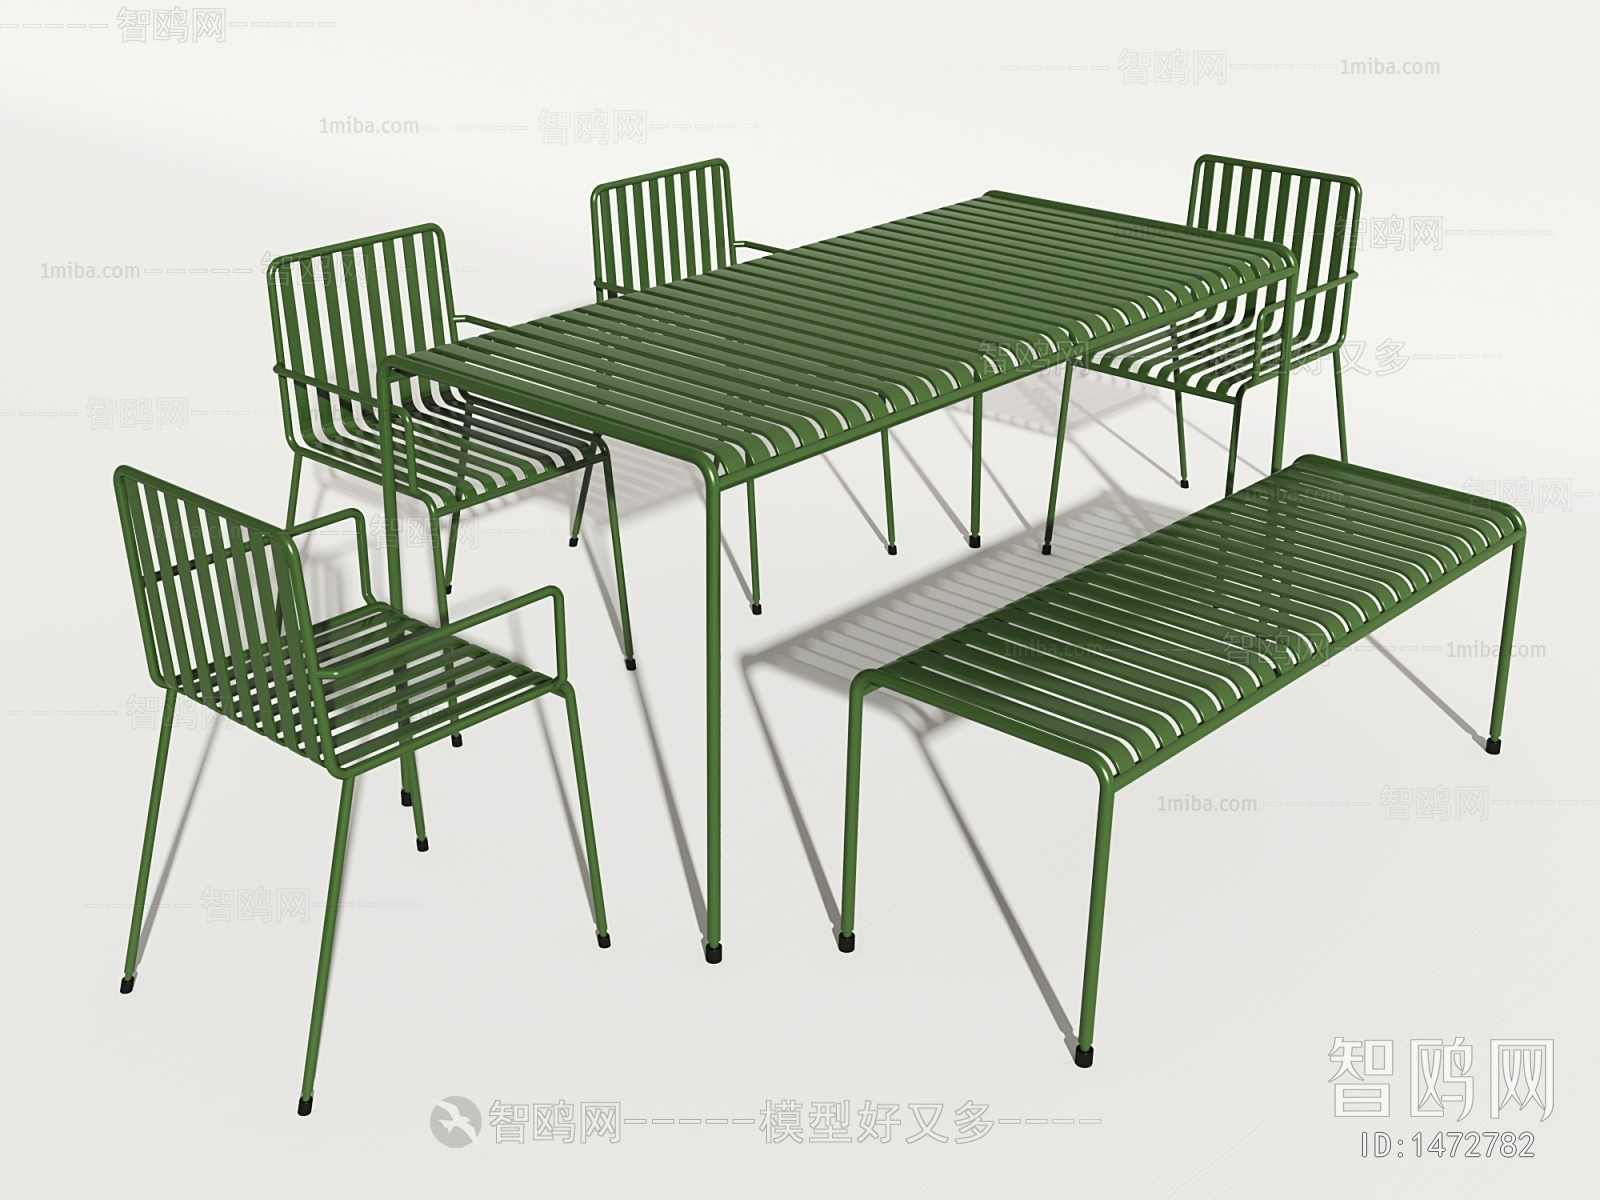 Modern Industrial Style Outdoor Tables And Chairs